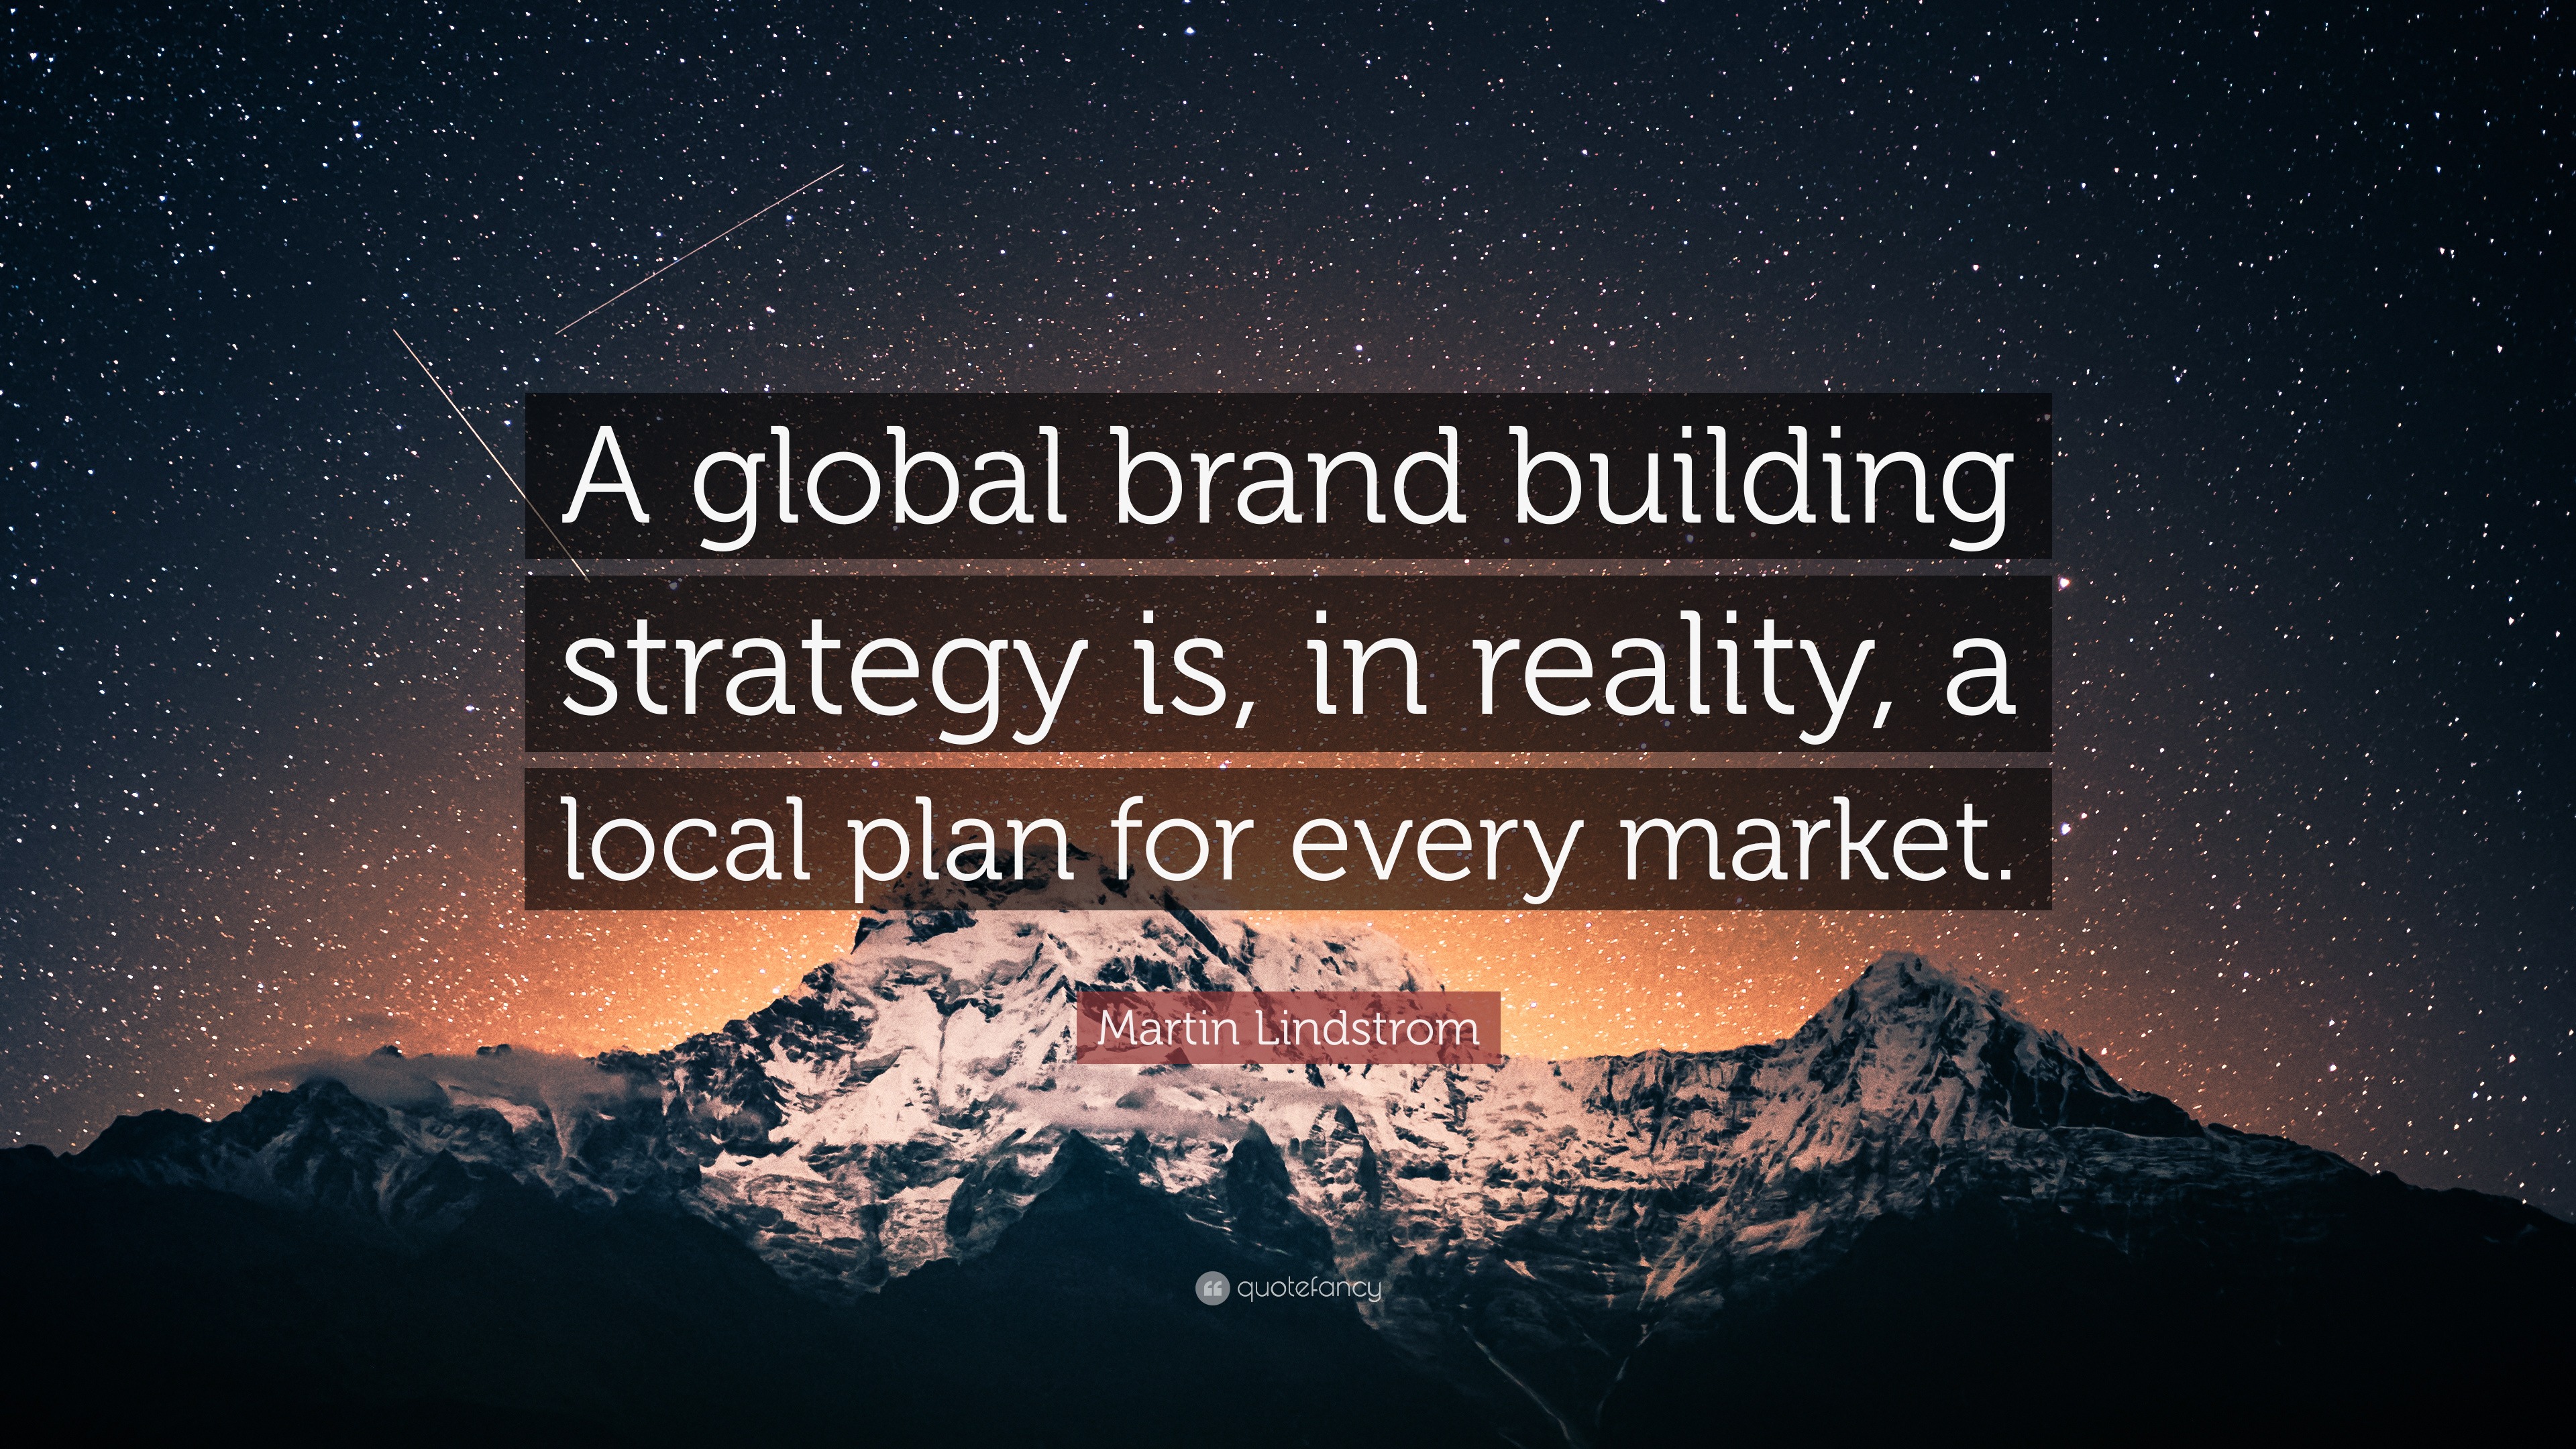 https://quotefancy.com/media/wallpaper/3840x2160/2180706-Martin-Lindstrom-Quote-A-global-brand-building-strategy-is-in.jpg